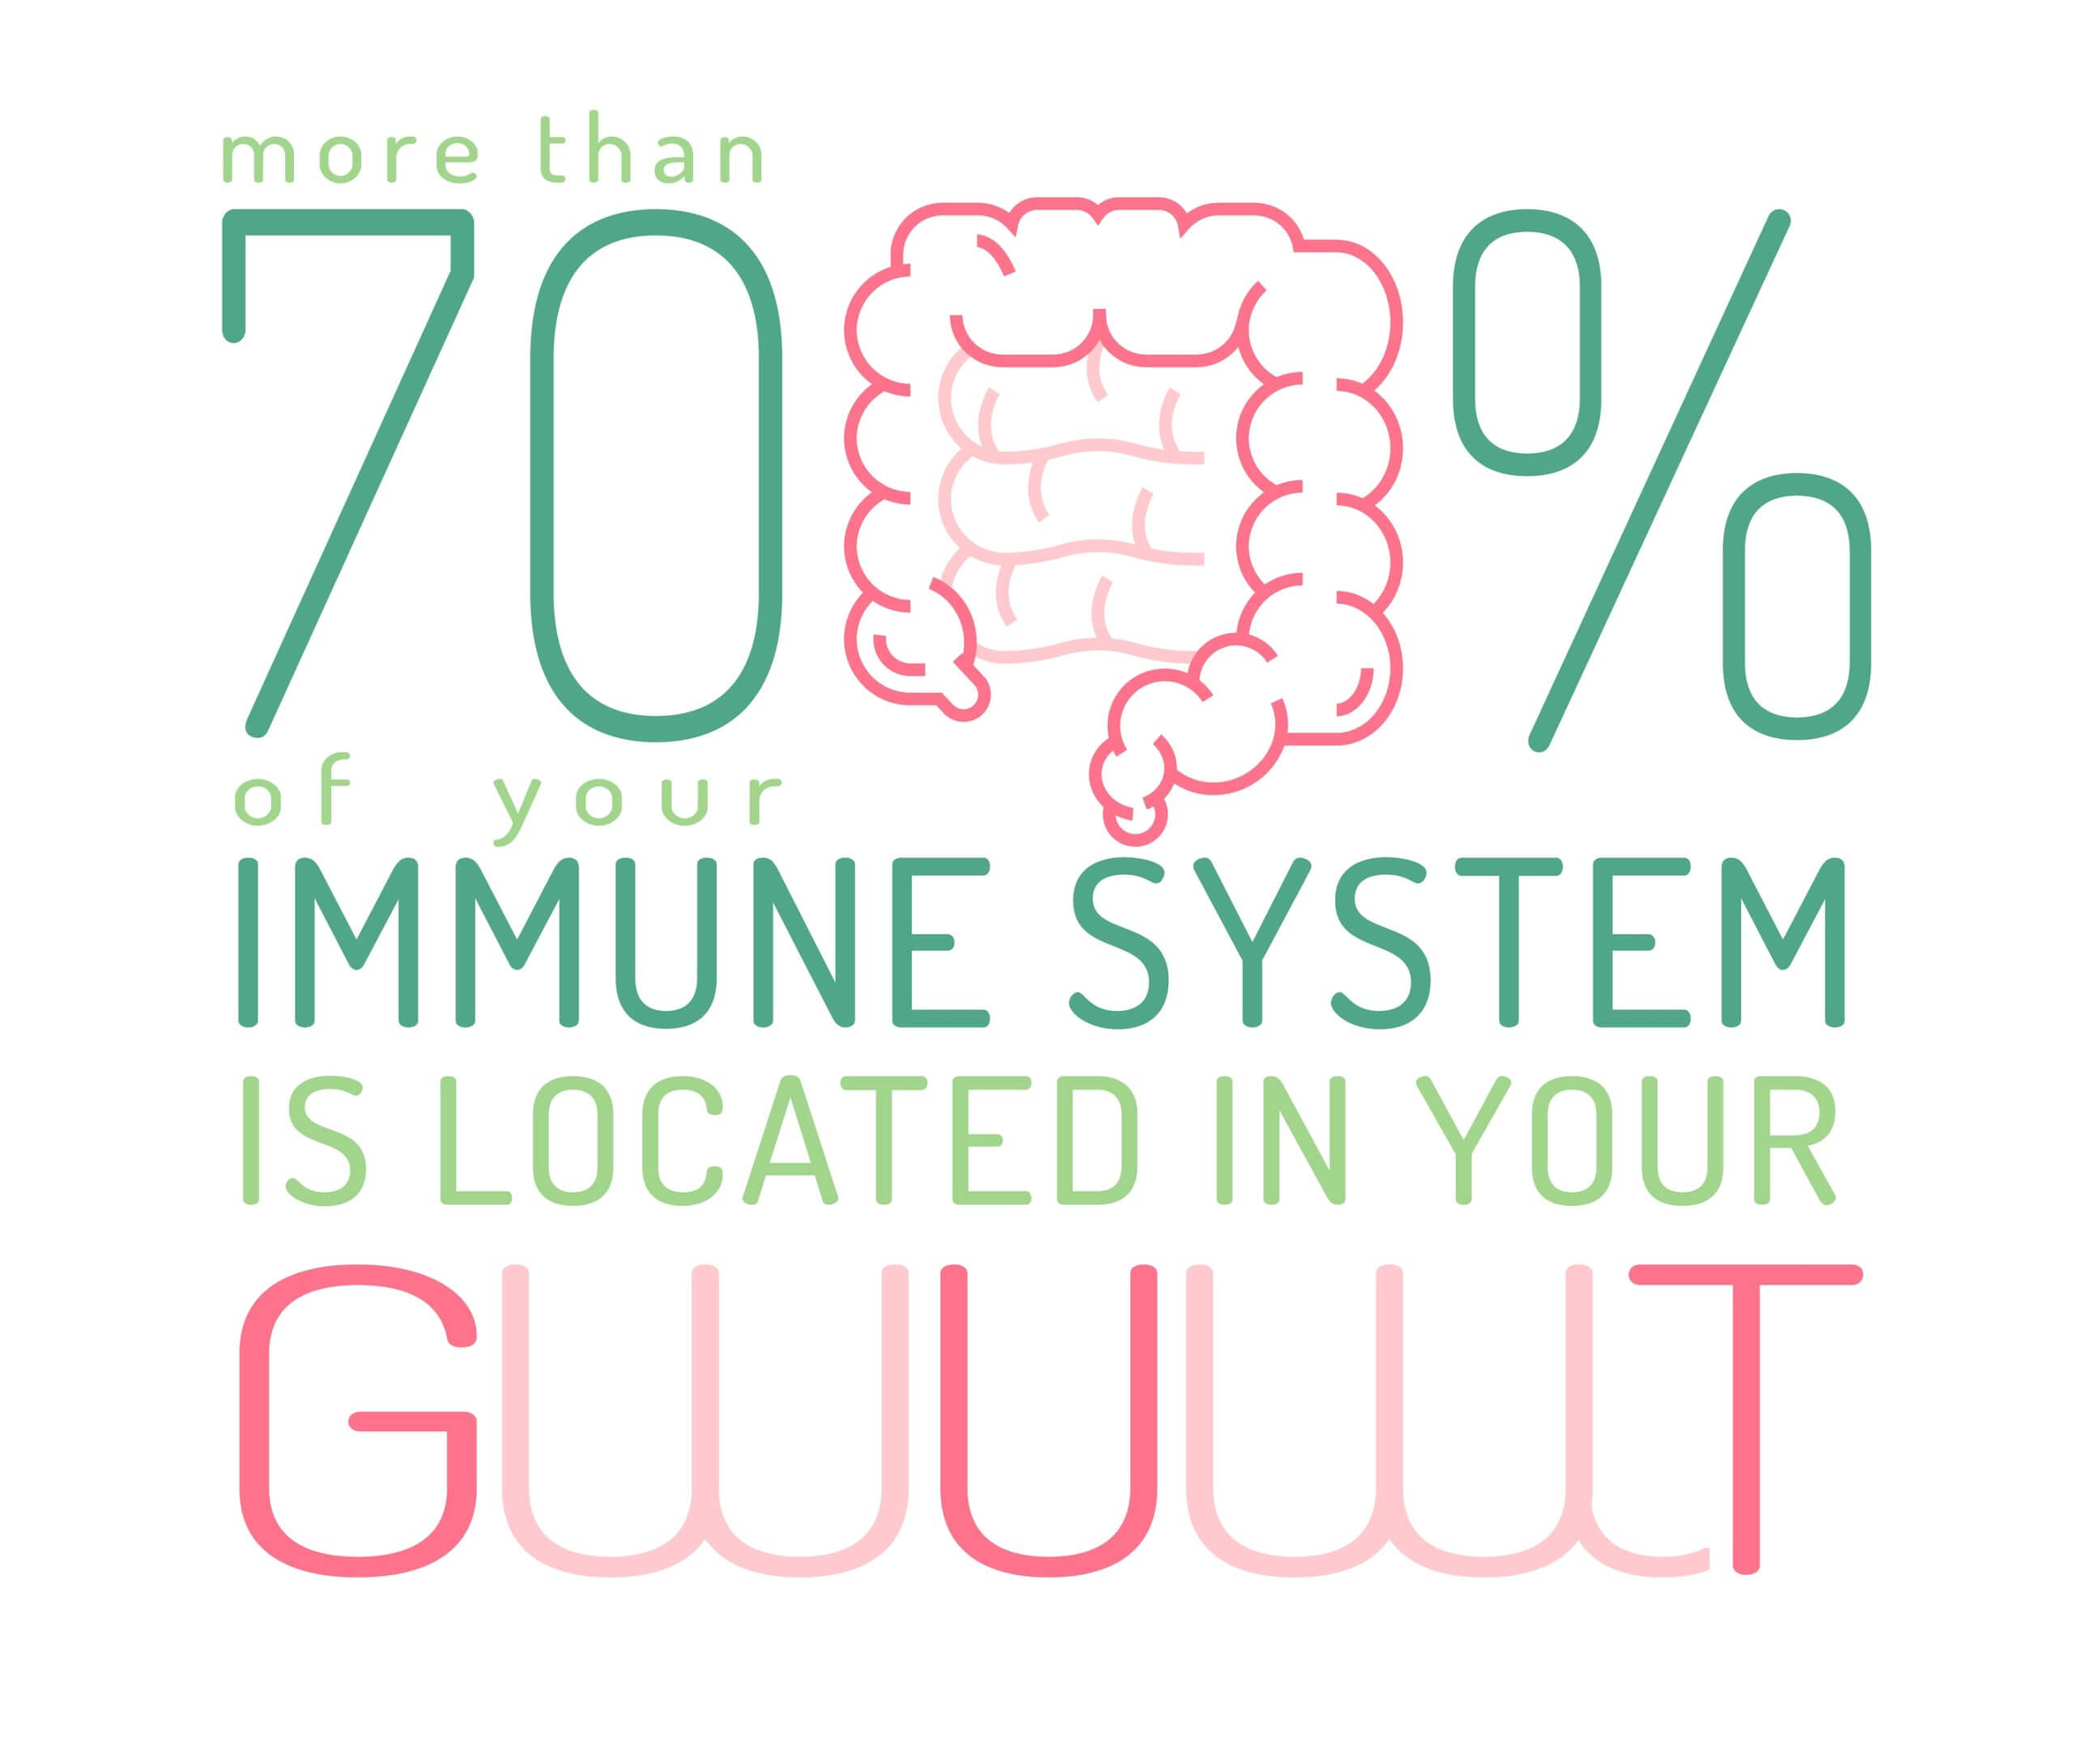 Image depicting 70% of your immune system is located in your gut.